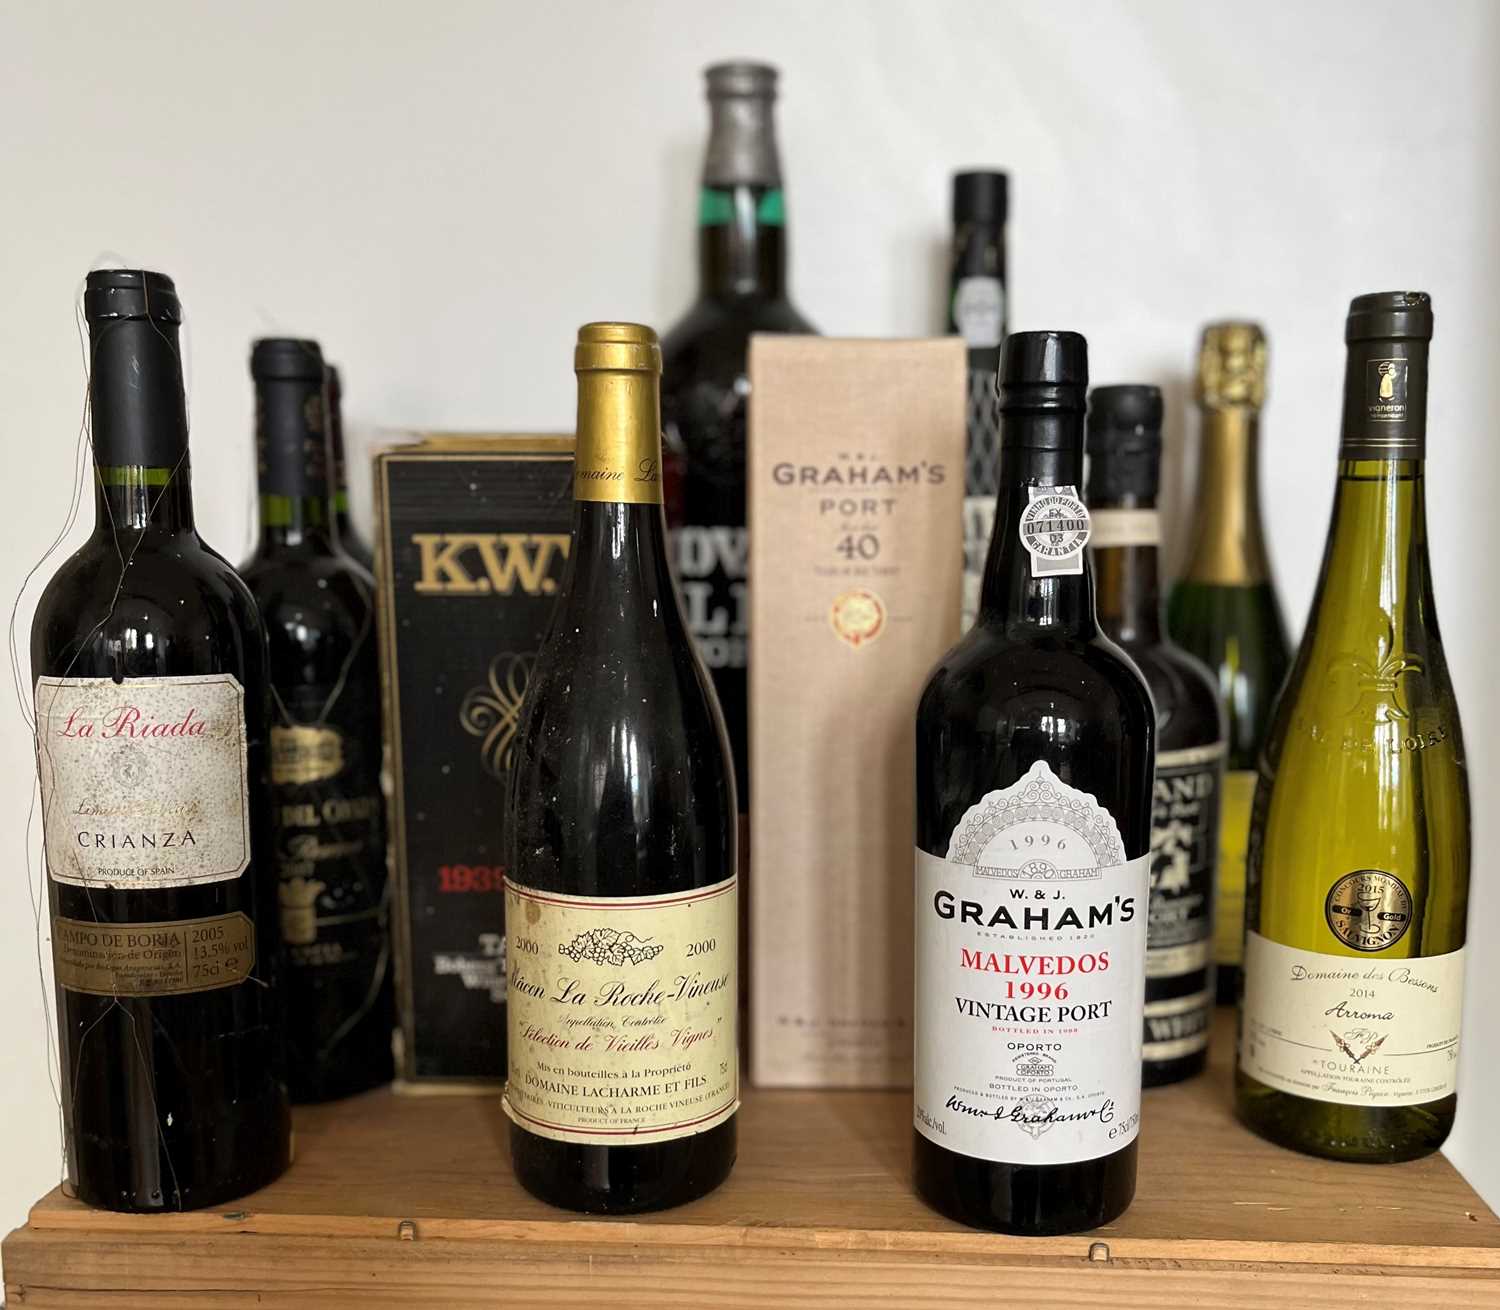 Lot 24 - 12 Bottles Mixed Lot Red Wine, Various Ports, and Sparkling Wine